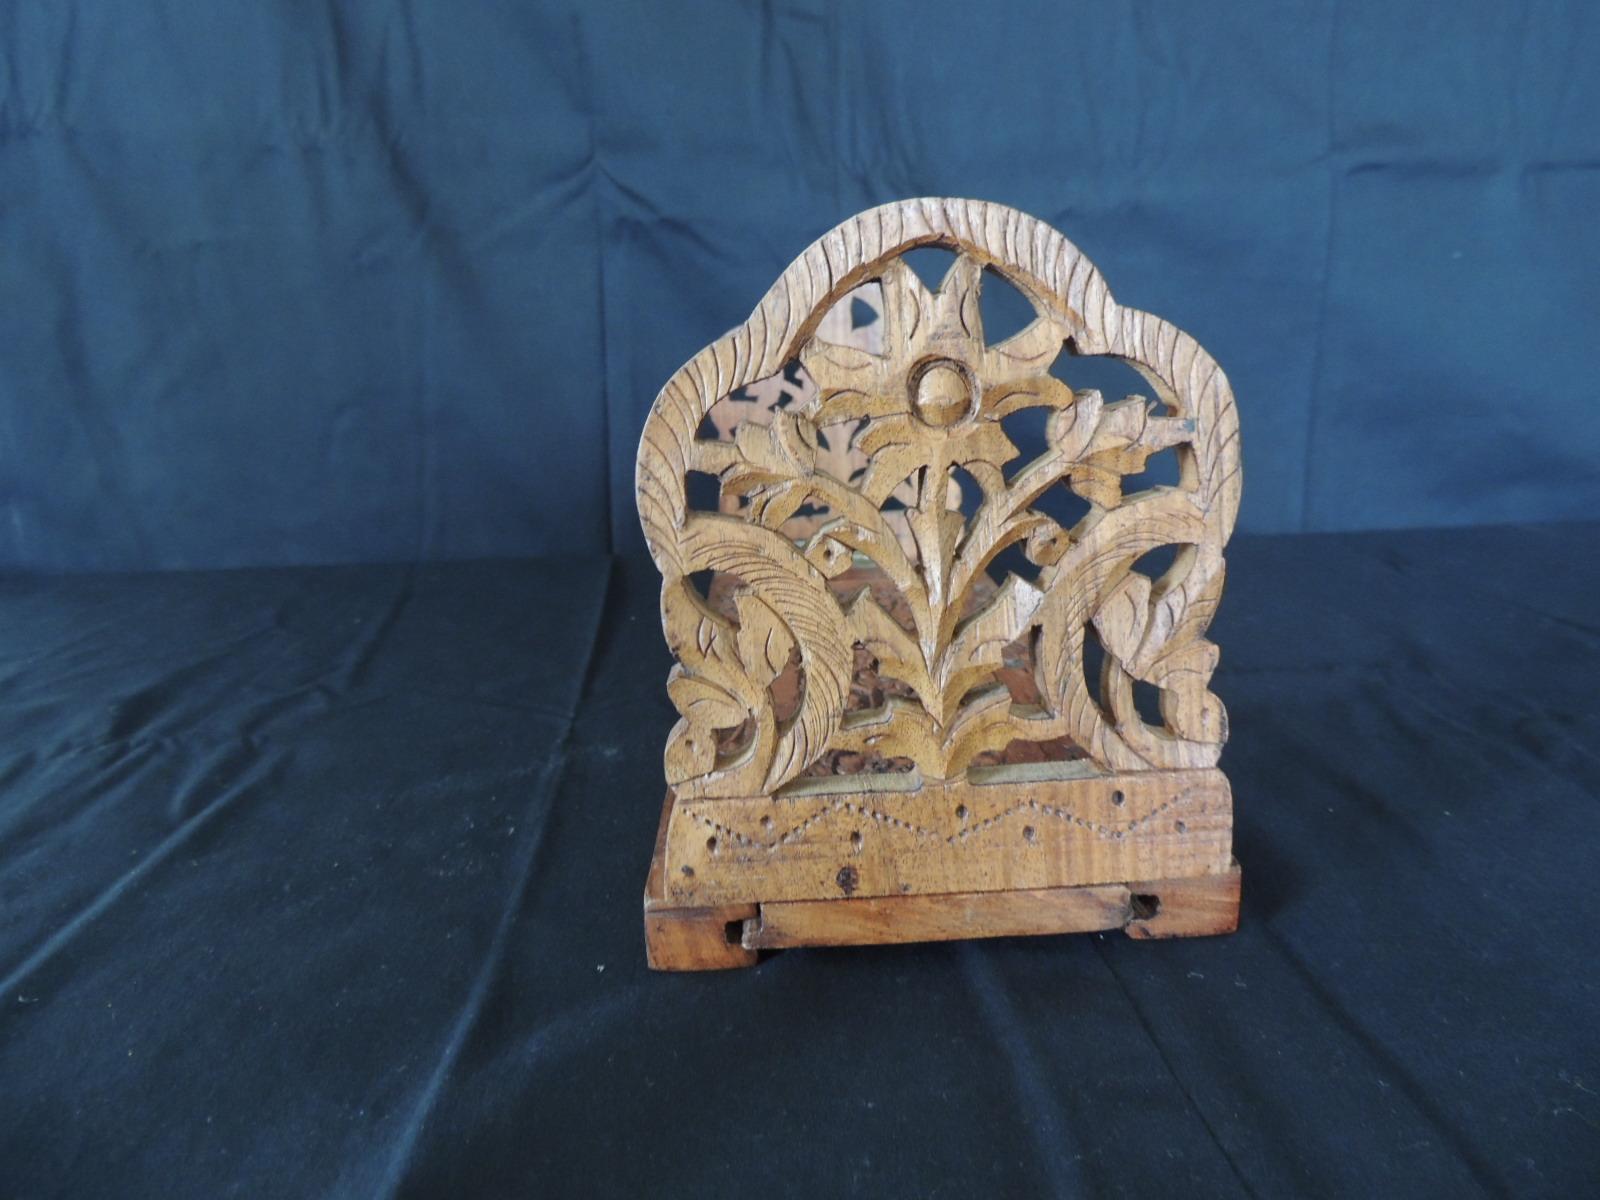 Vintage hand carved Indian book shelf or stand.
Expandable wooden shelf expands up to 19